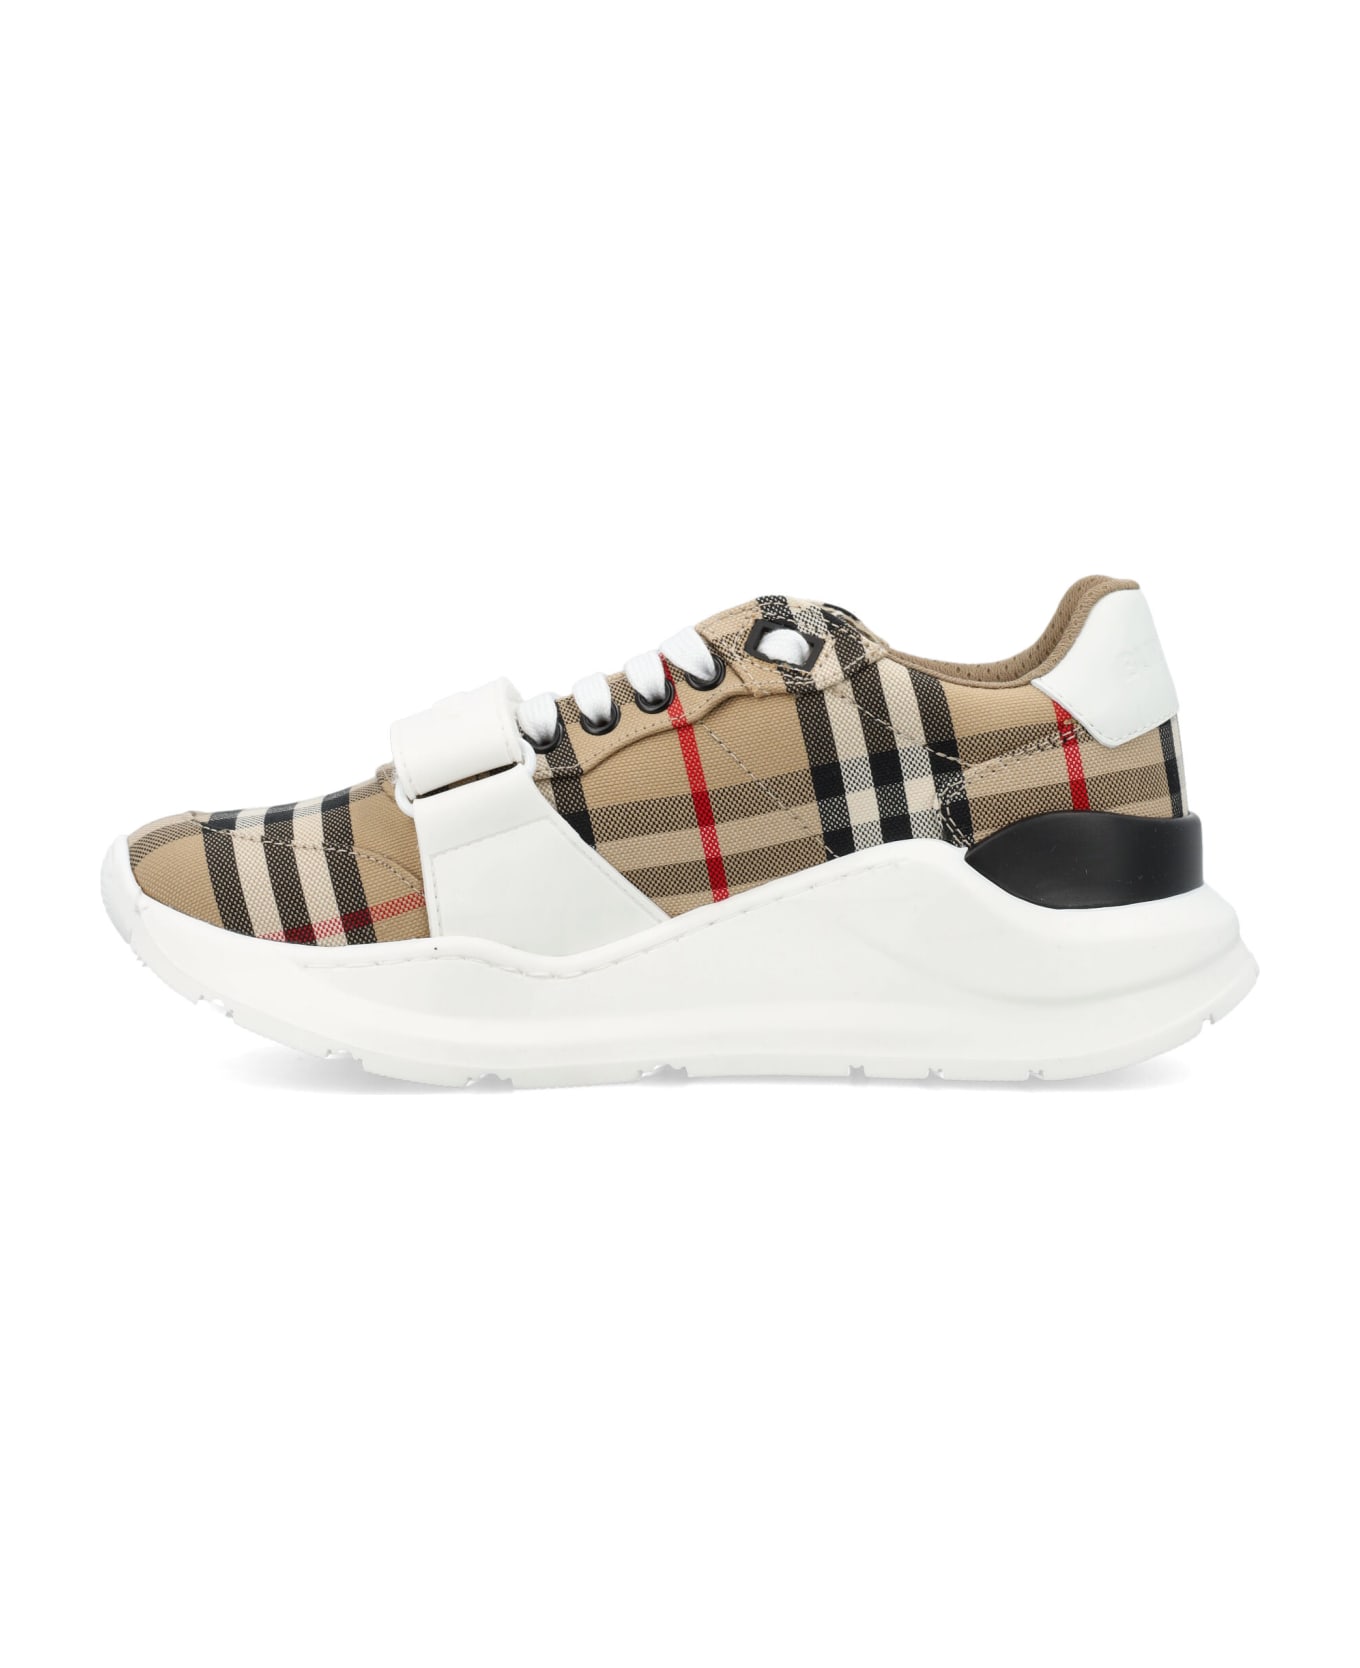 Burberry London Check Woman's Sneakers - ARCHIVE BEIGE IP CHK スニーカー